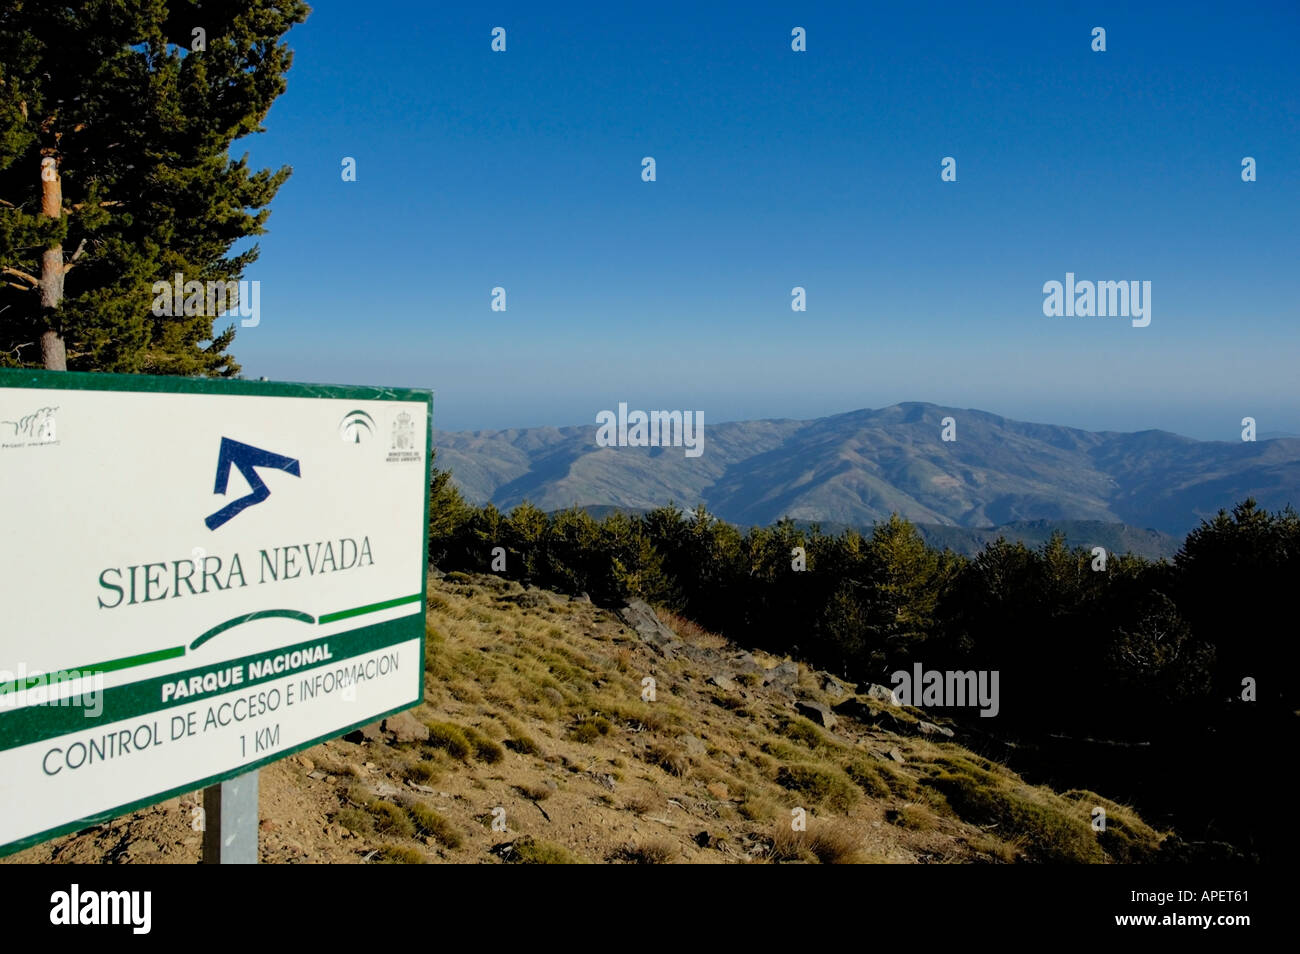 Forest and Alpujarras mountain peaks in Sierra Nevada National Park, Granada, Andalucia, Spain. Stock Photo